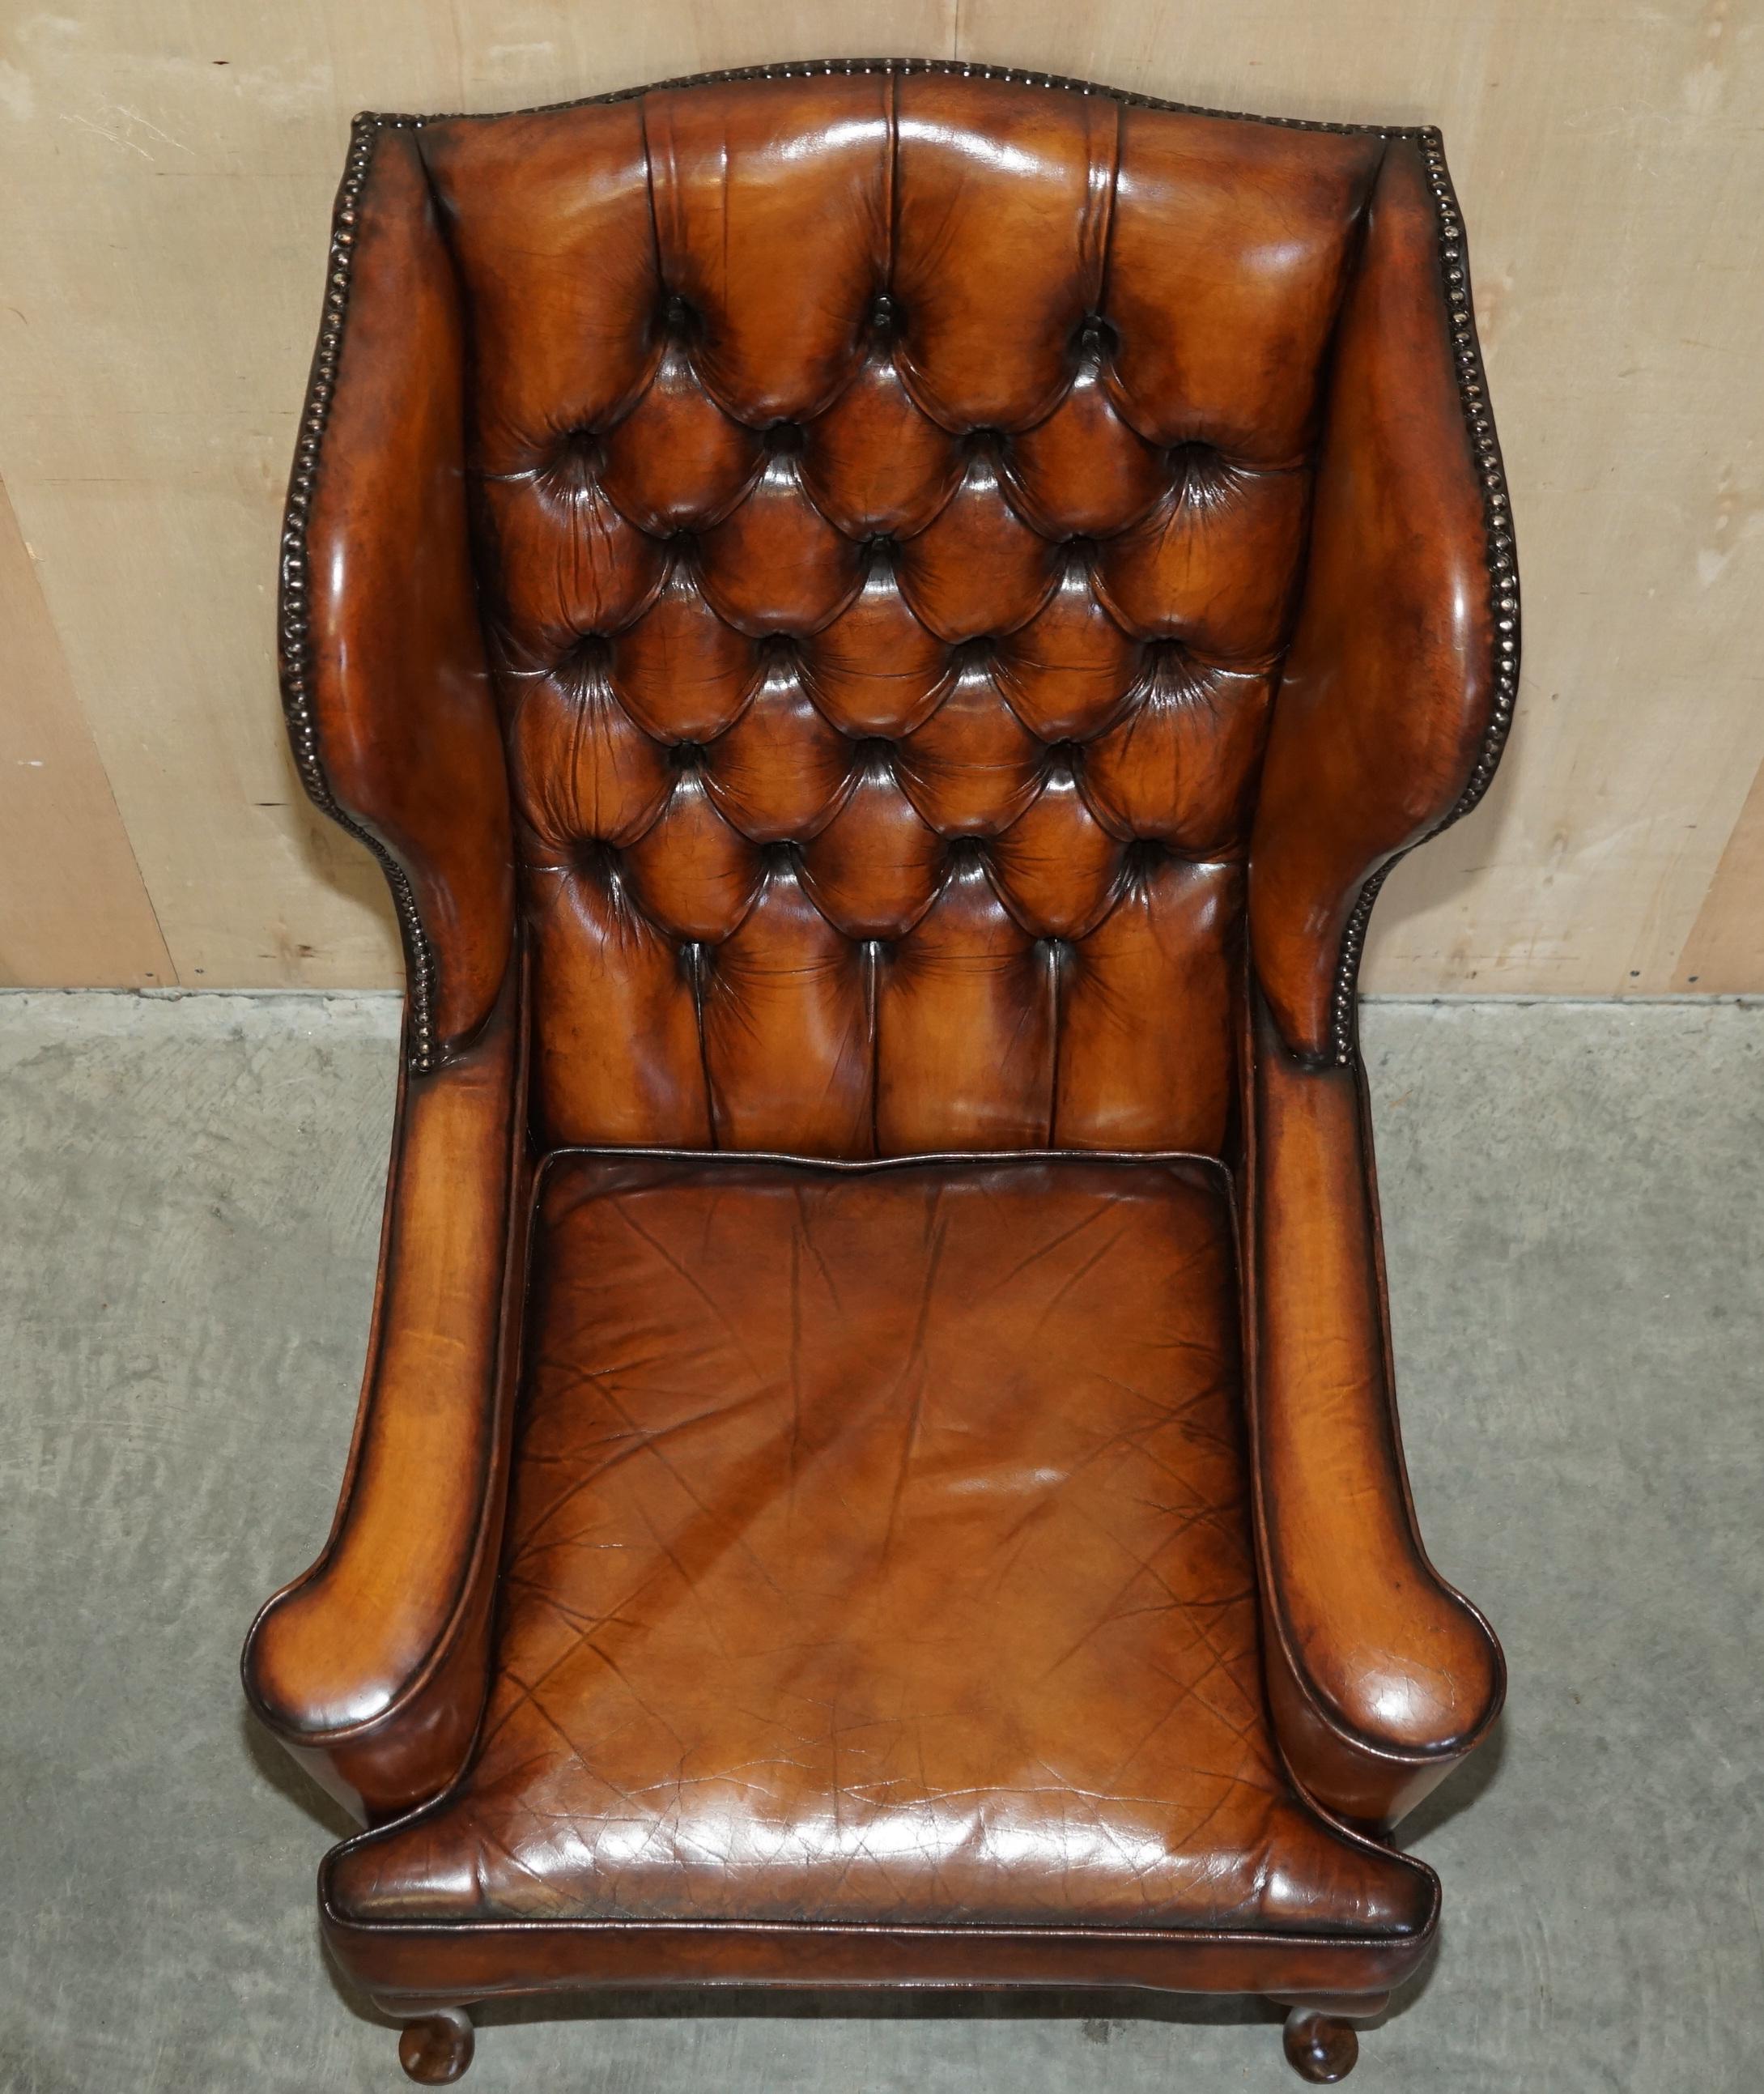 PAIR OF ANTIQUE WILLIAM MORRIS WiNGBACK ARMCHAIRS HAND DYED CIGAR BROWN LEATHER For Sale 2